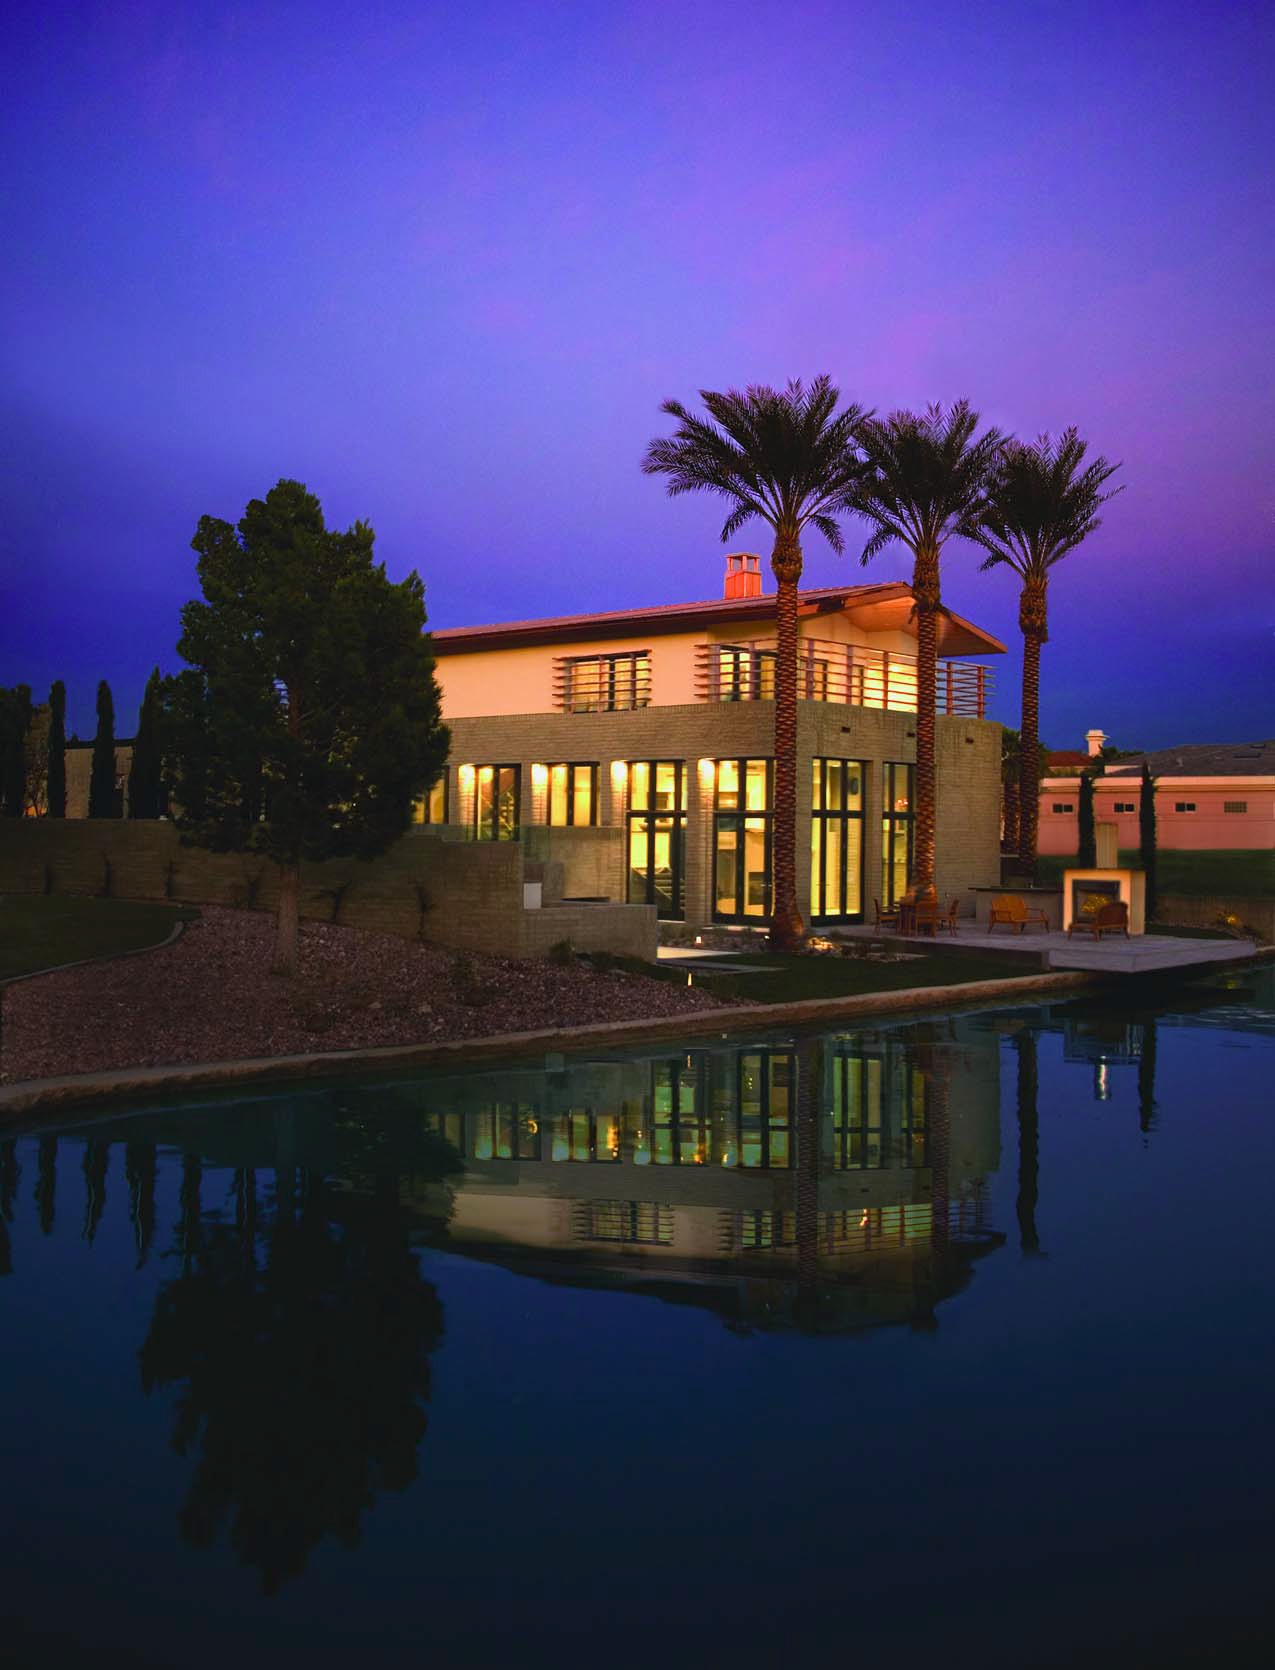 Constructed by Merlin Contracting, L.L.C., the $1.9 million, 5,180- square-foot New American Home 2004 is in the luxury community of The Lakes at West Sahara, about 15 minutes from the Las Vegas Strip.The home is described to have a modern loft design.